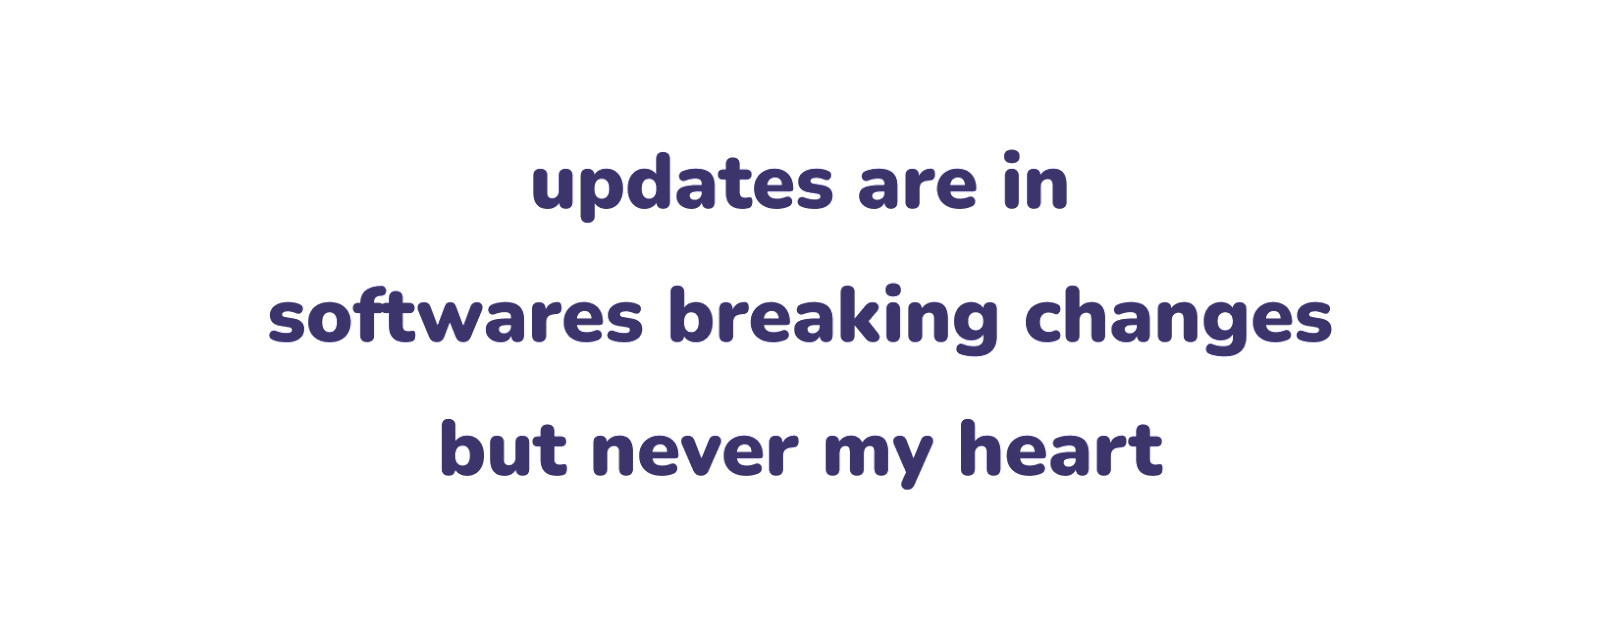 the haiku from Frédéric Harper goes by "updates are in / softwares breaking changes / but never my heart"